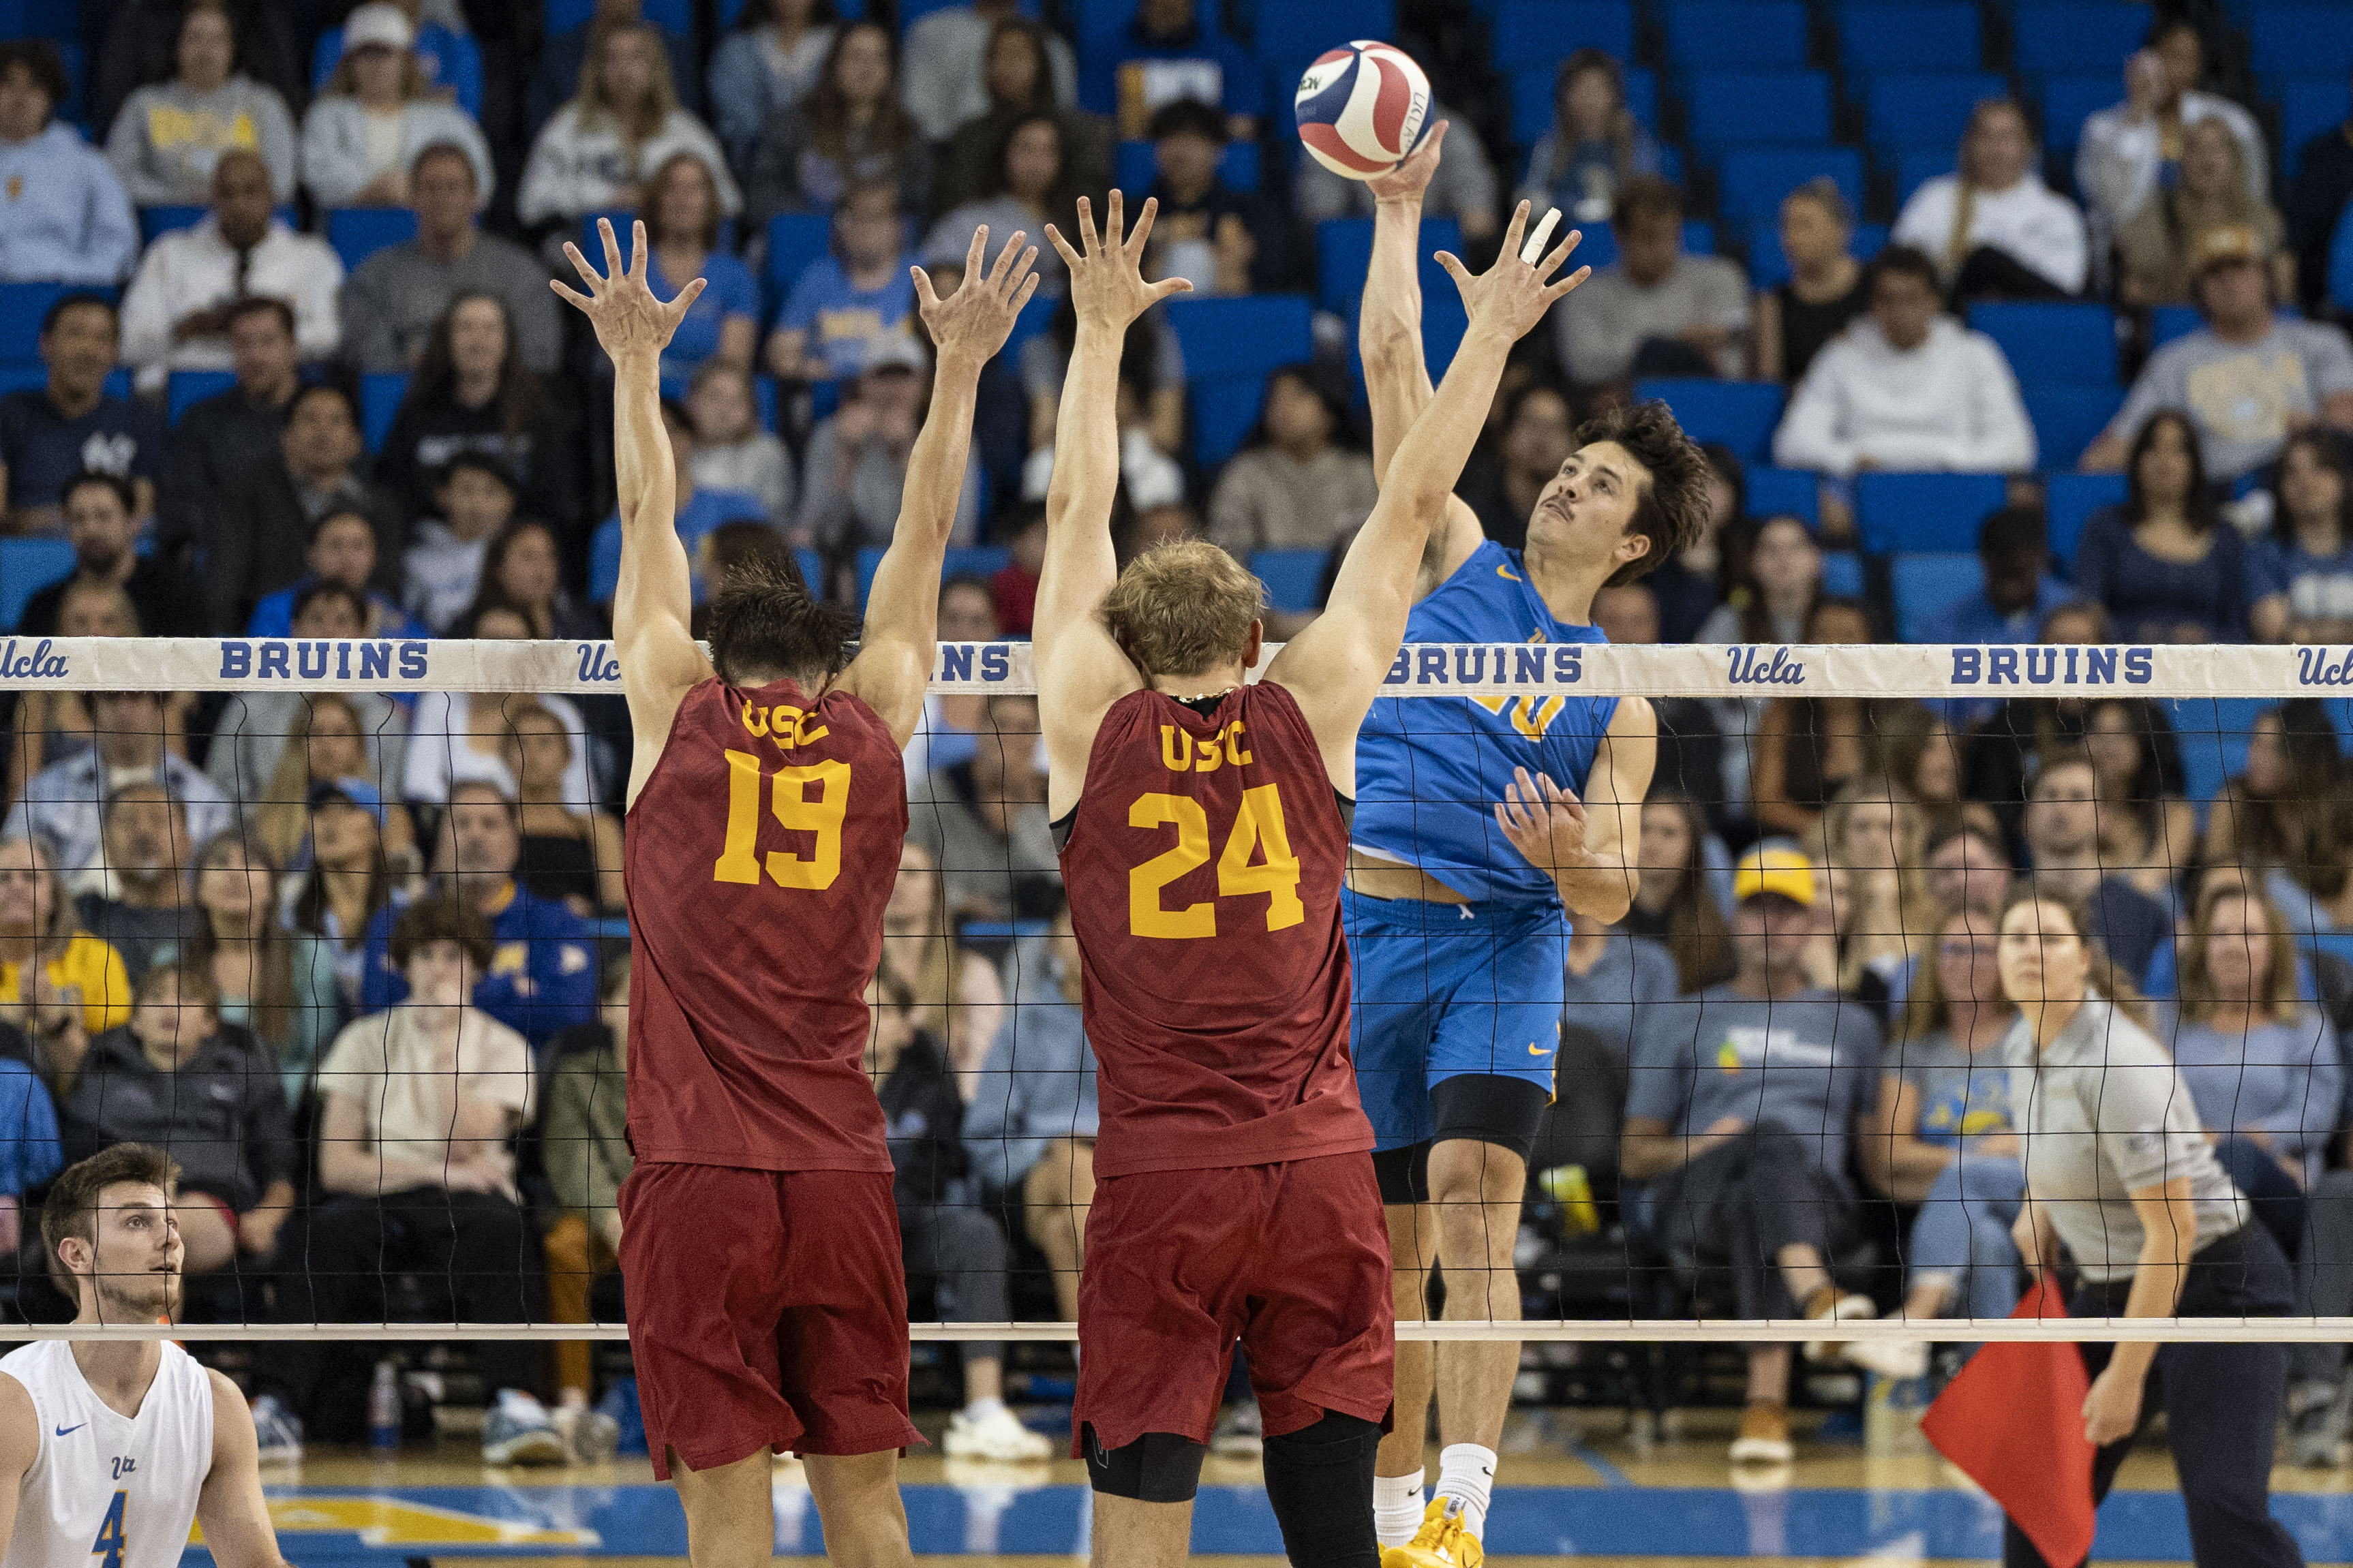 Men's volleyball seeks redemption for last year's loss to CSUN - Daily Bruin